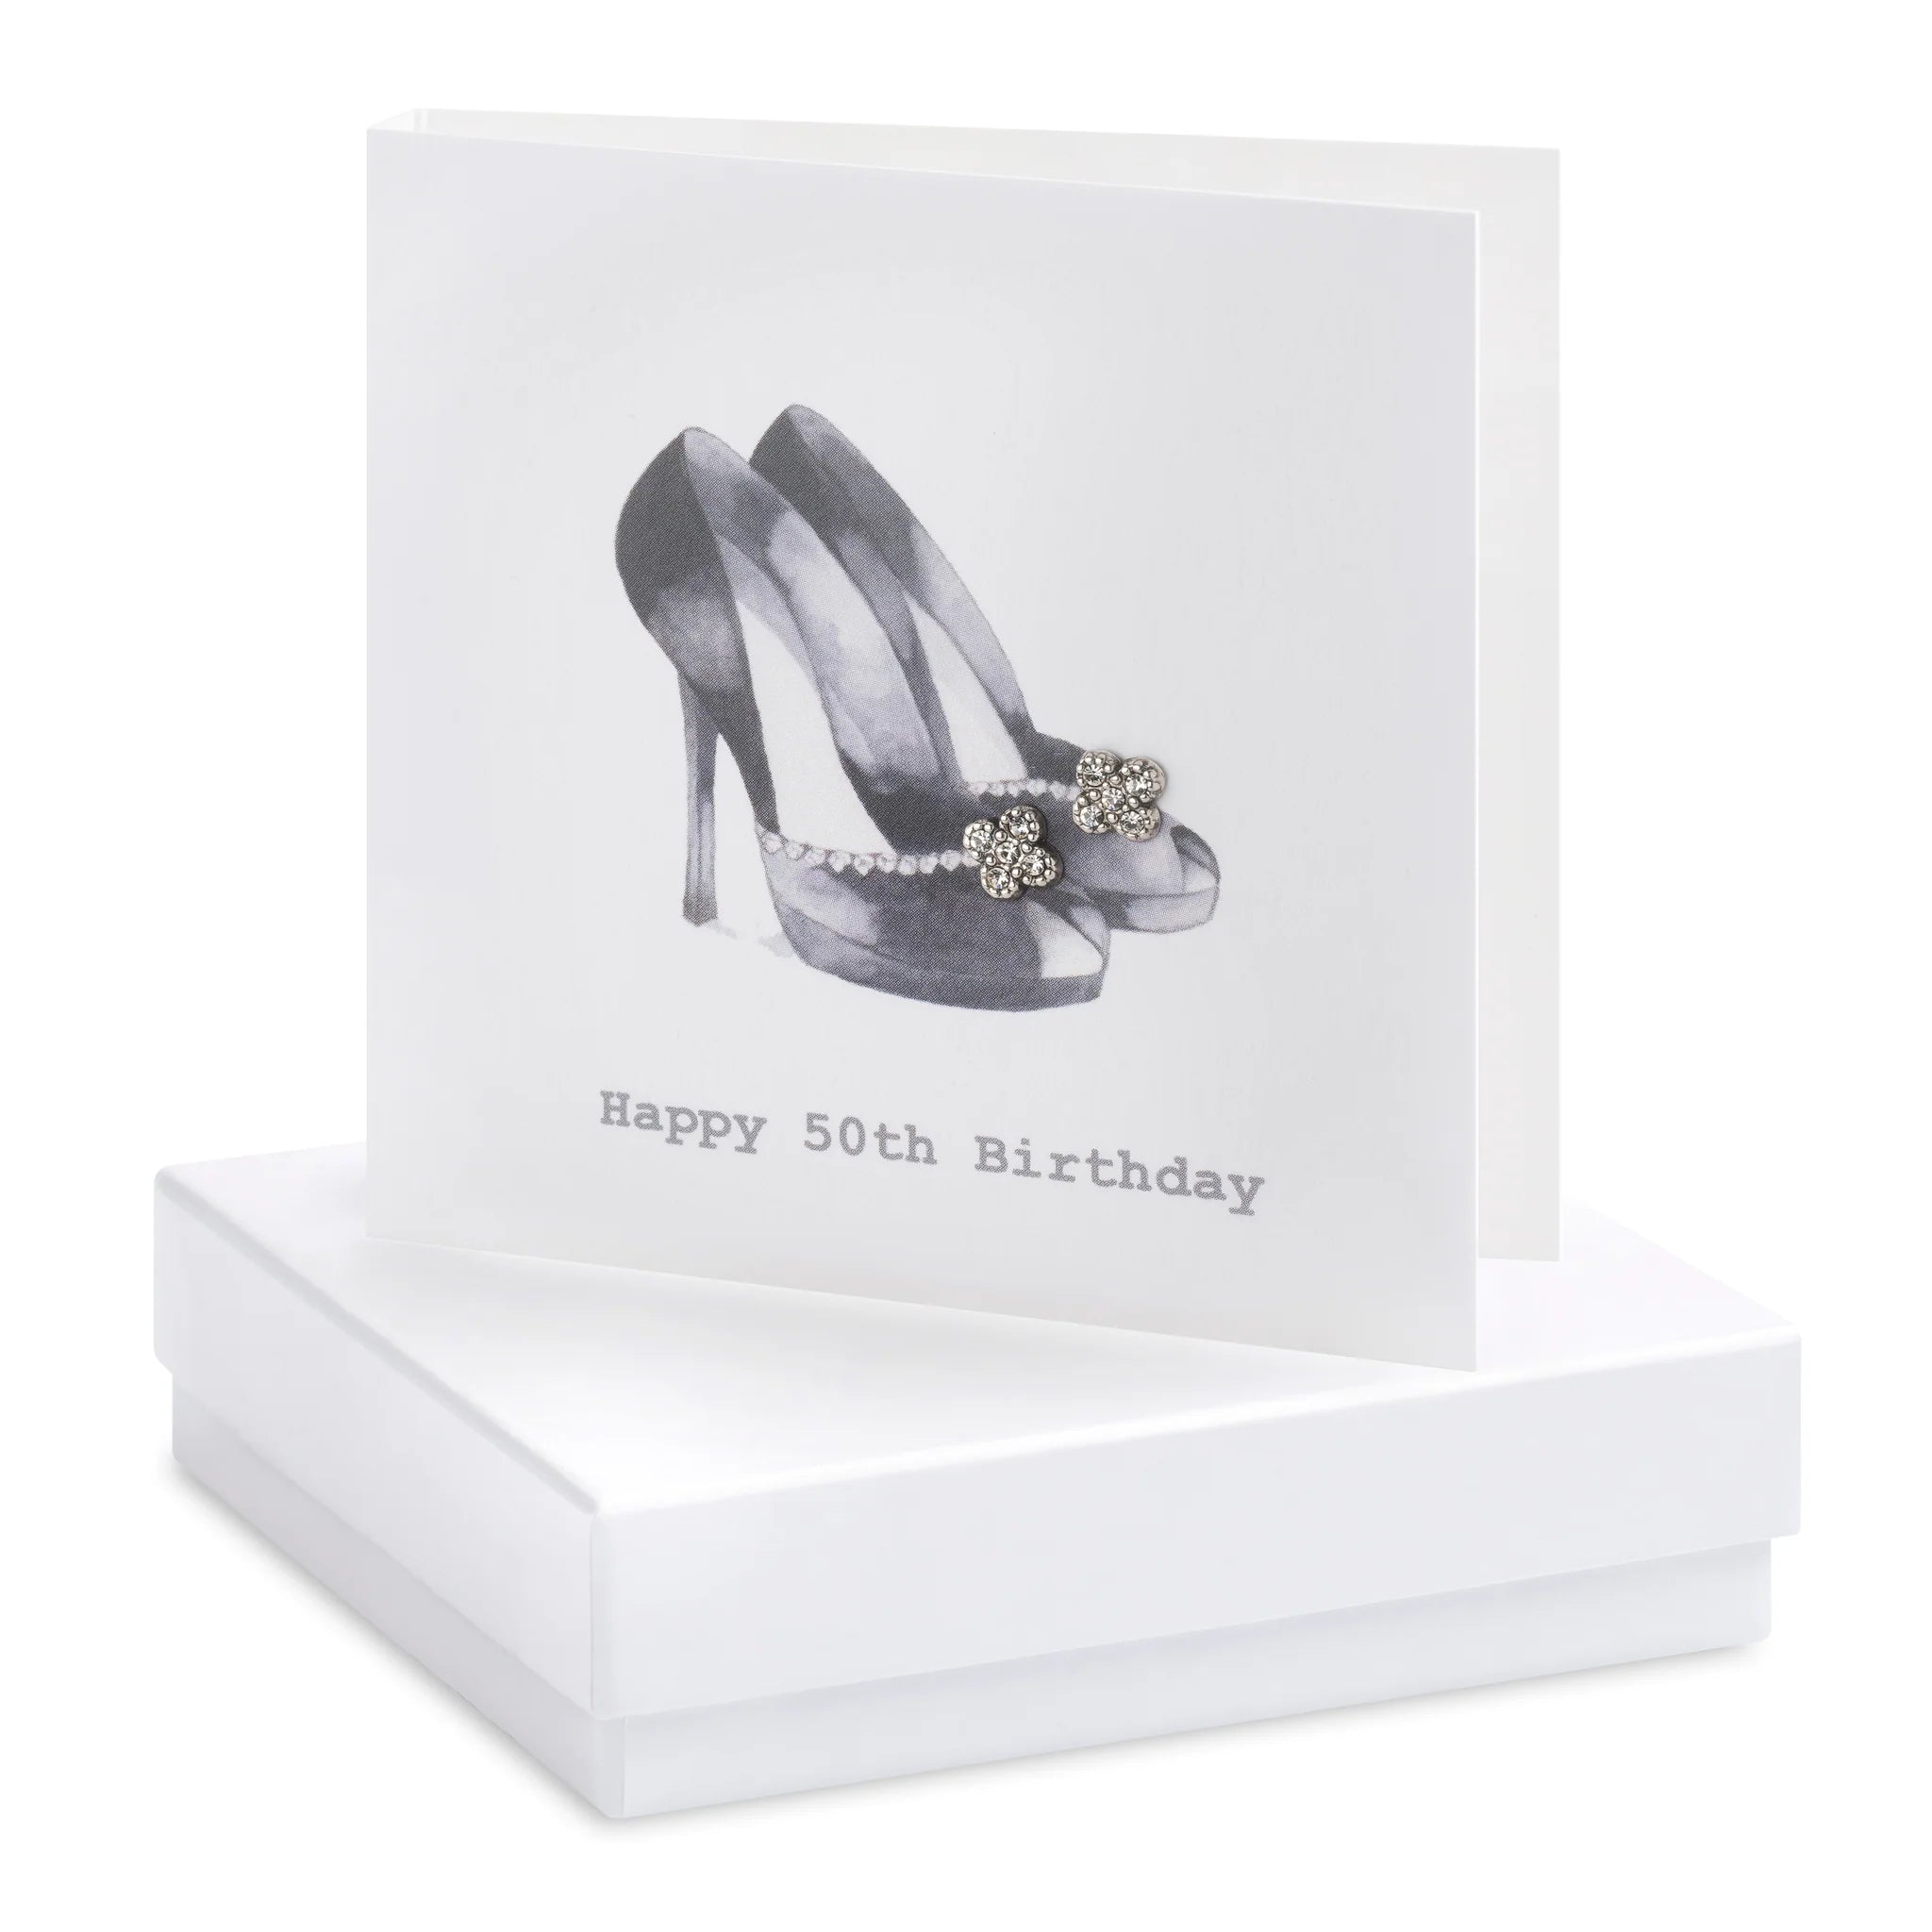 Crumble & Core | 50th Birthday Card with Earrings in a White Box Weirs of Baggot Street